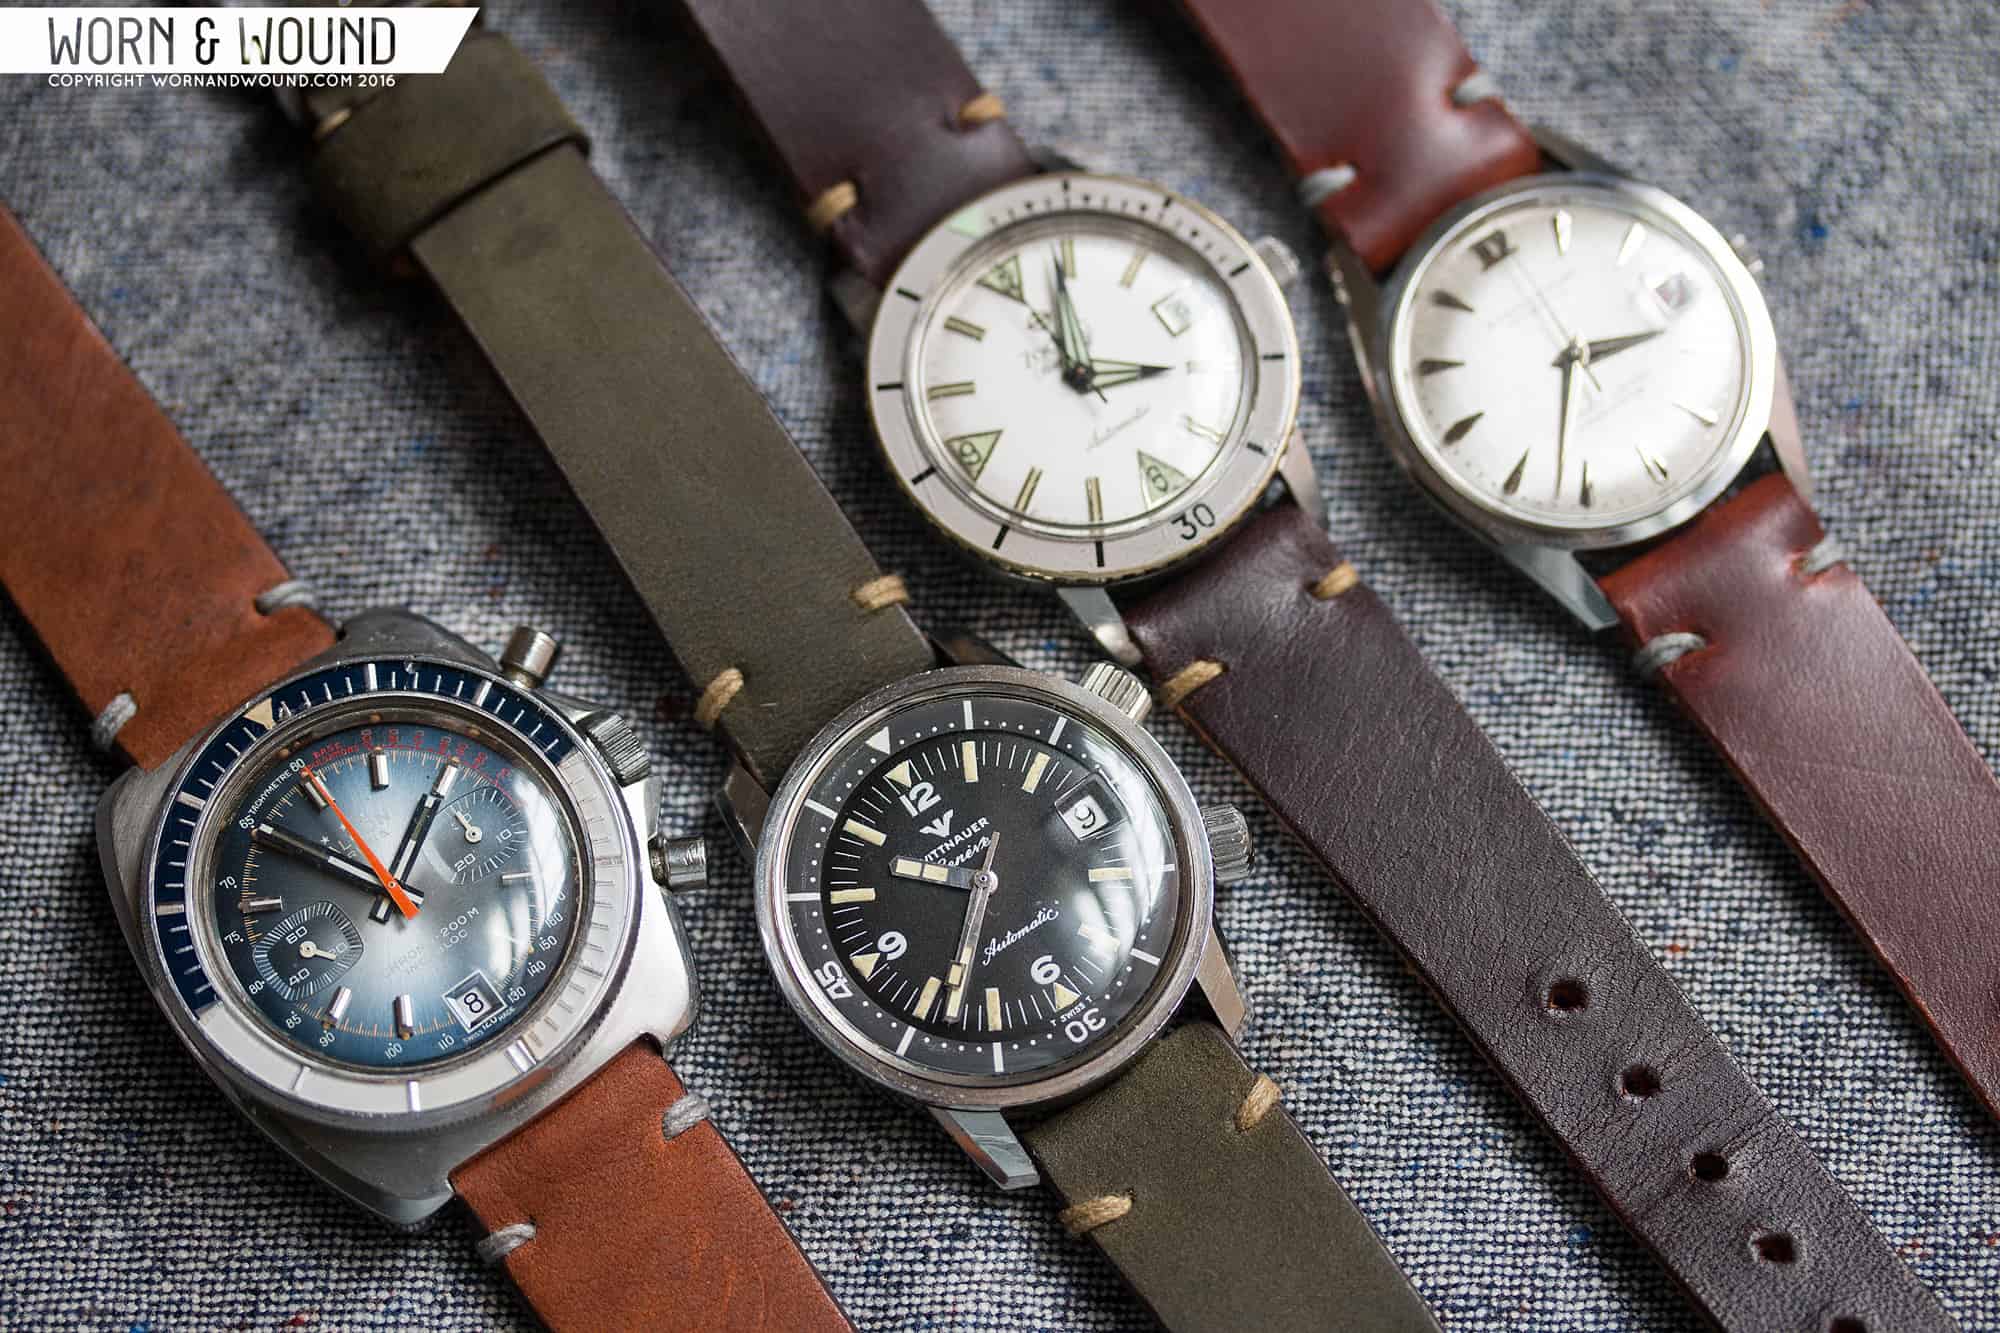 10:25 Vintage and Analog/Shift Join Forces - Worn & Wound